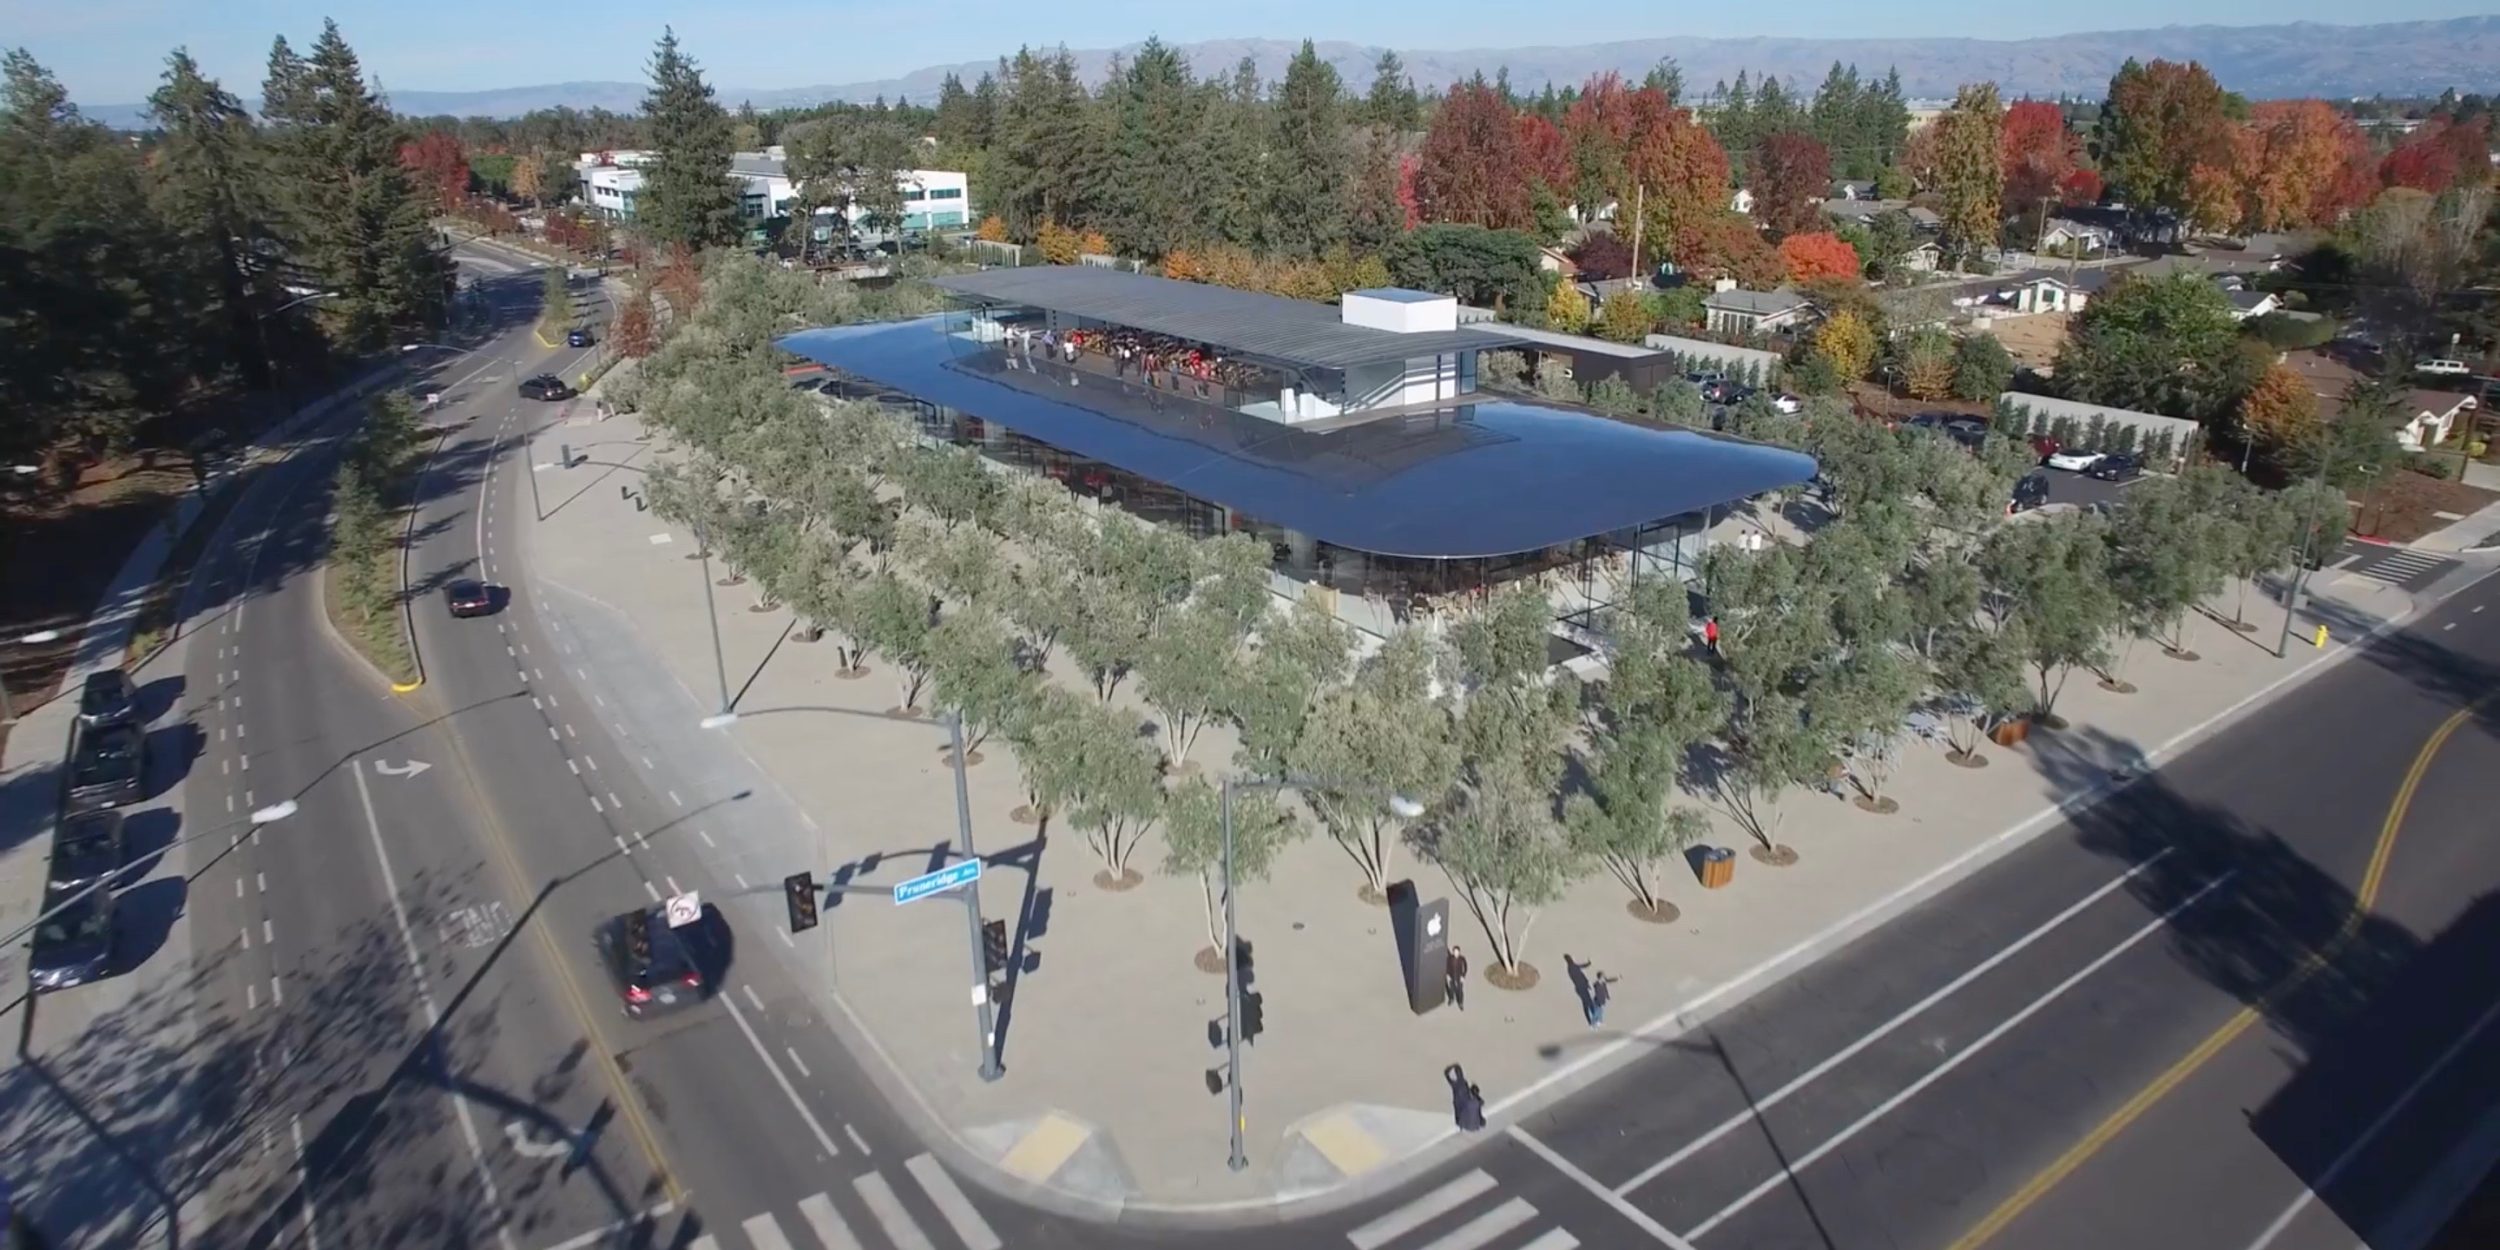 4K Drone Footage Captures Apple Park Visitor Center From the Sky